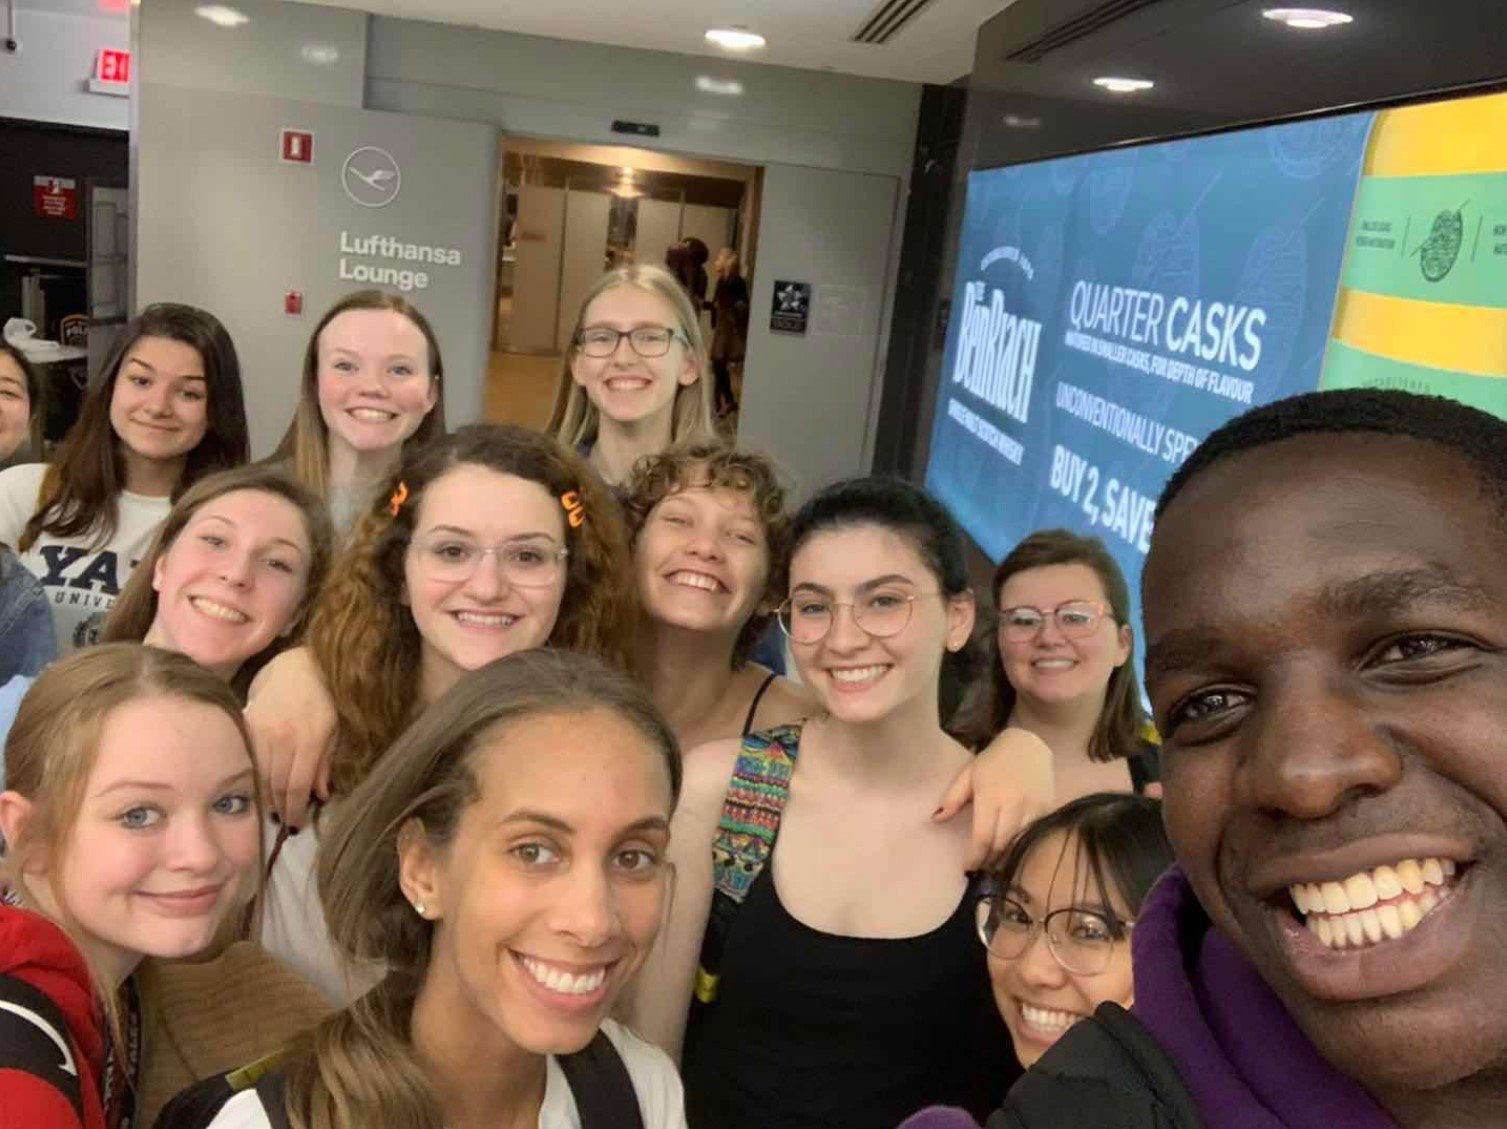 A Student Study Tour group takes a selfie in the Lufthansa Lounge at John F. Kennedy Airport.